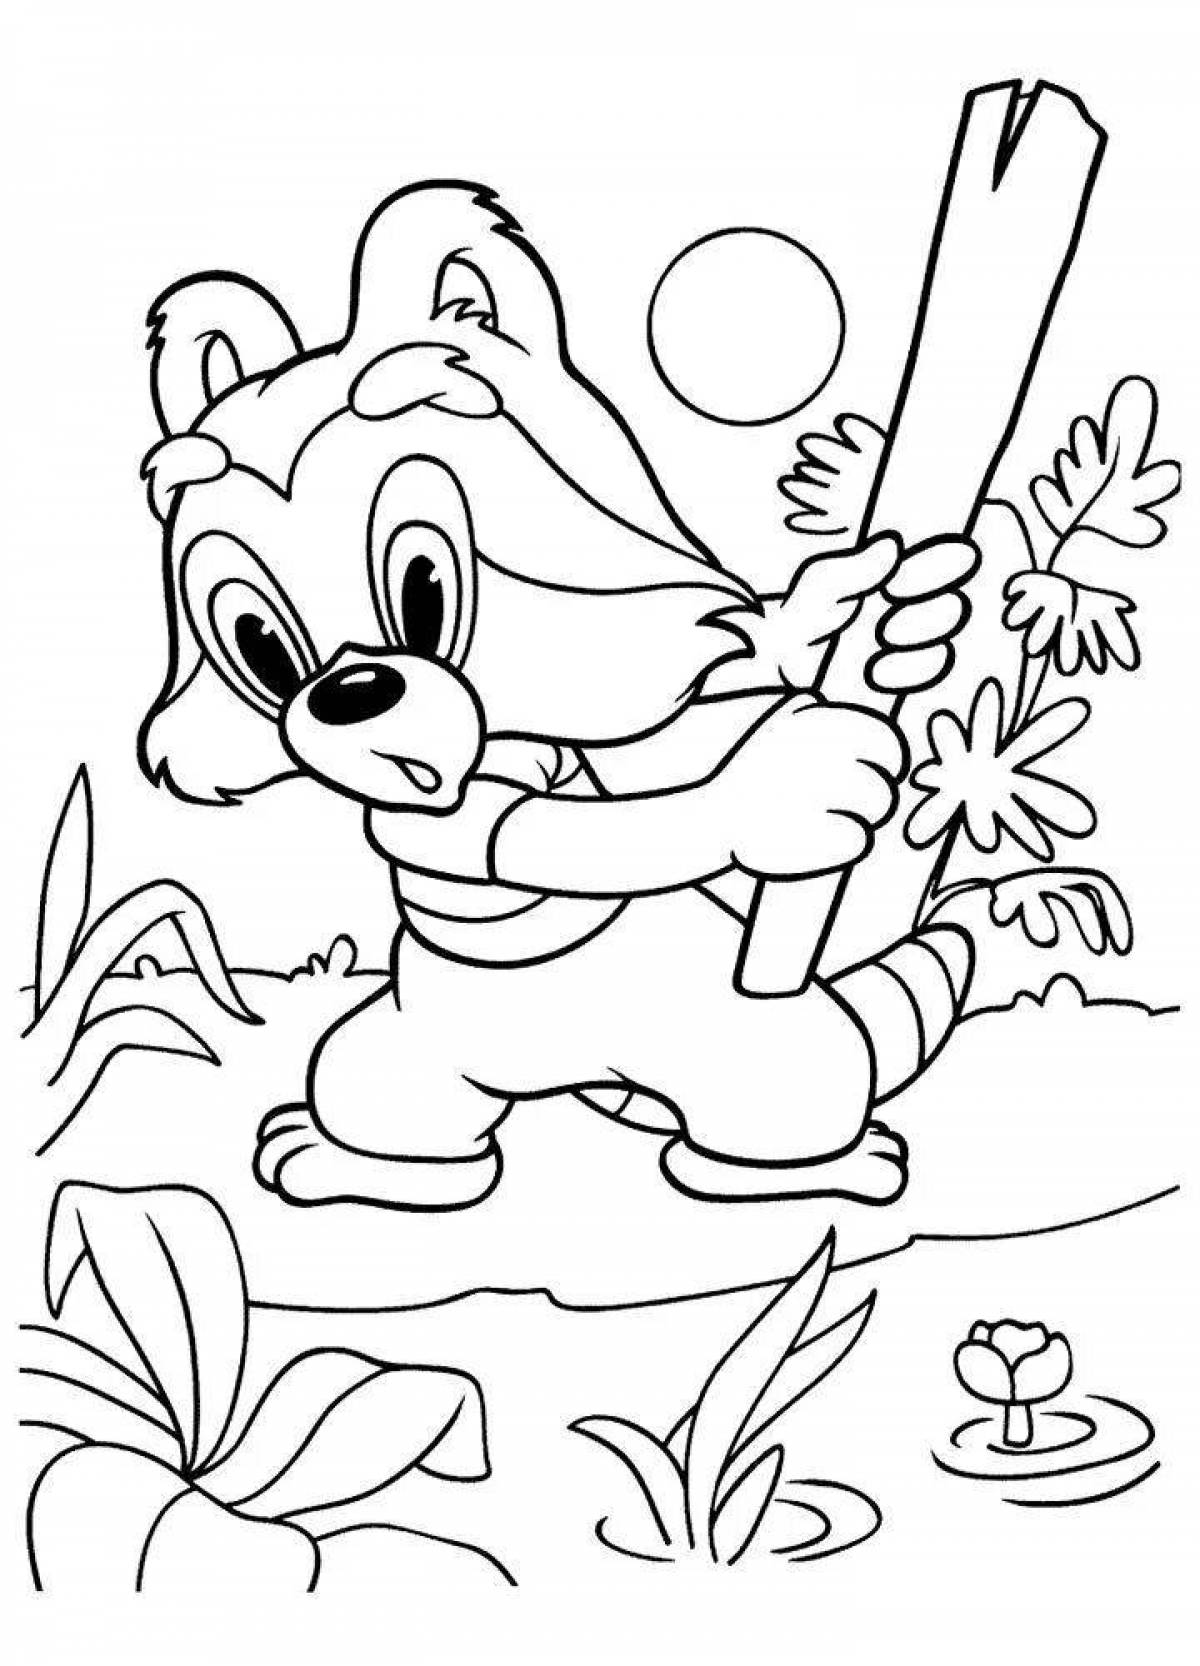 Colorful coloring book in pdf format